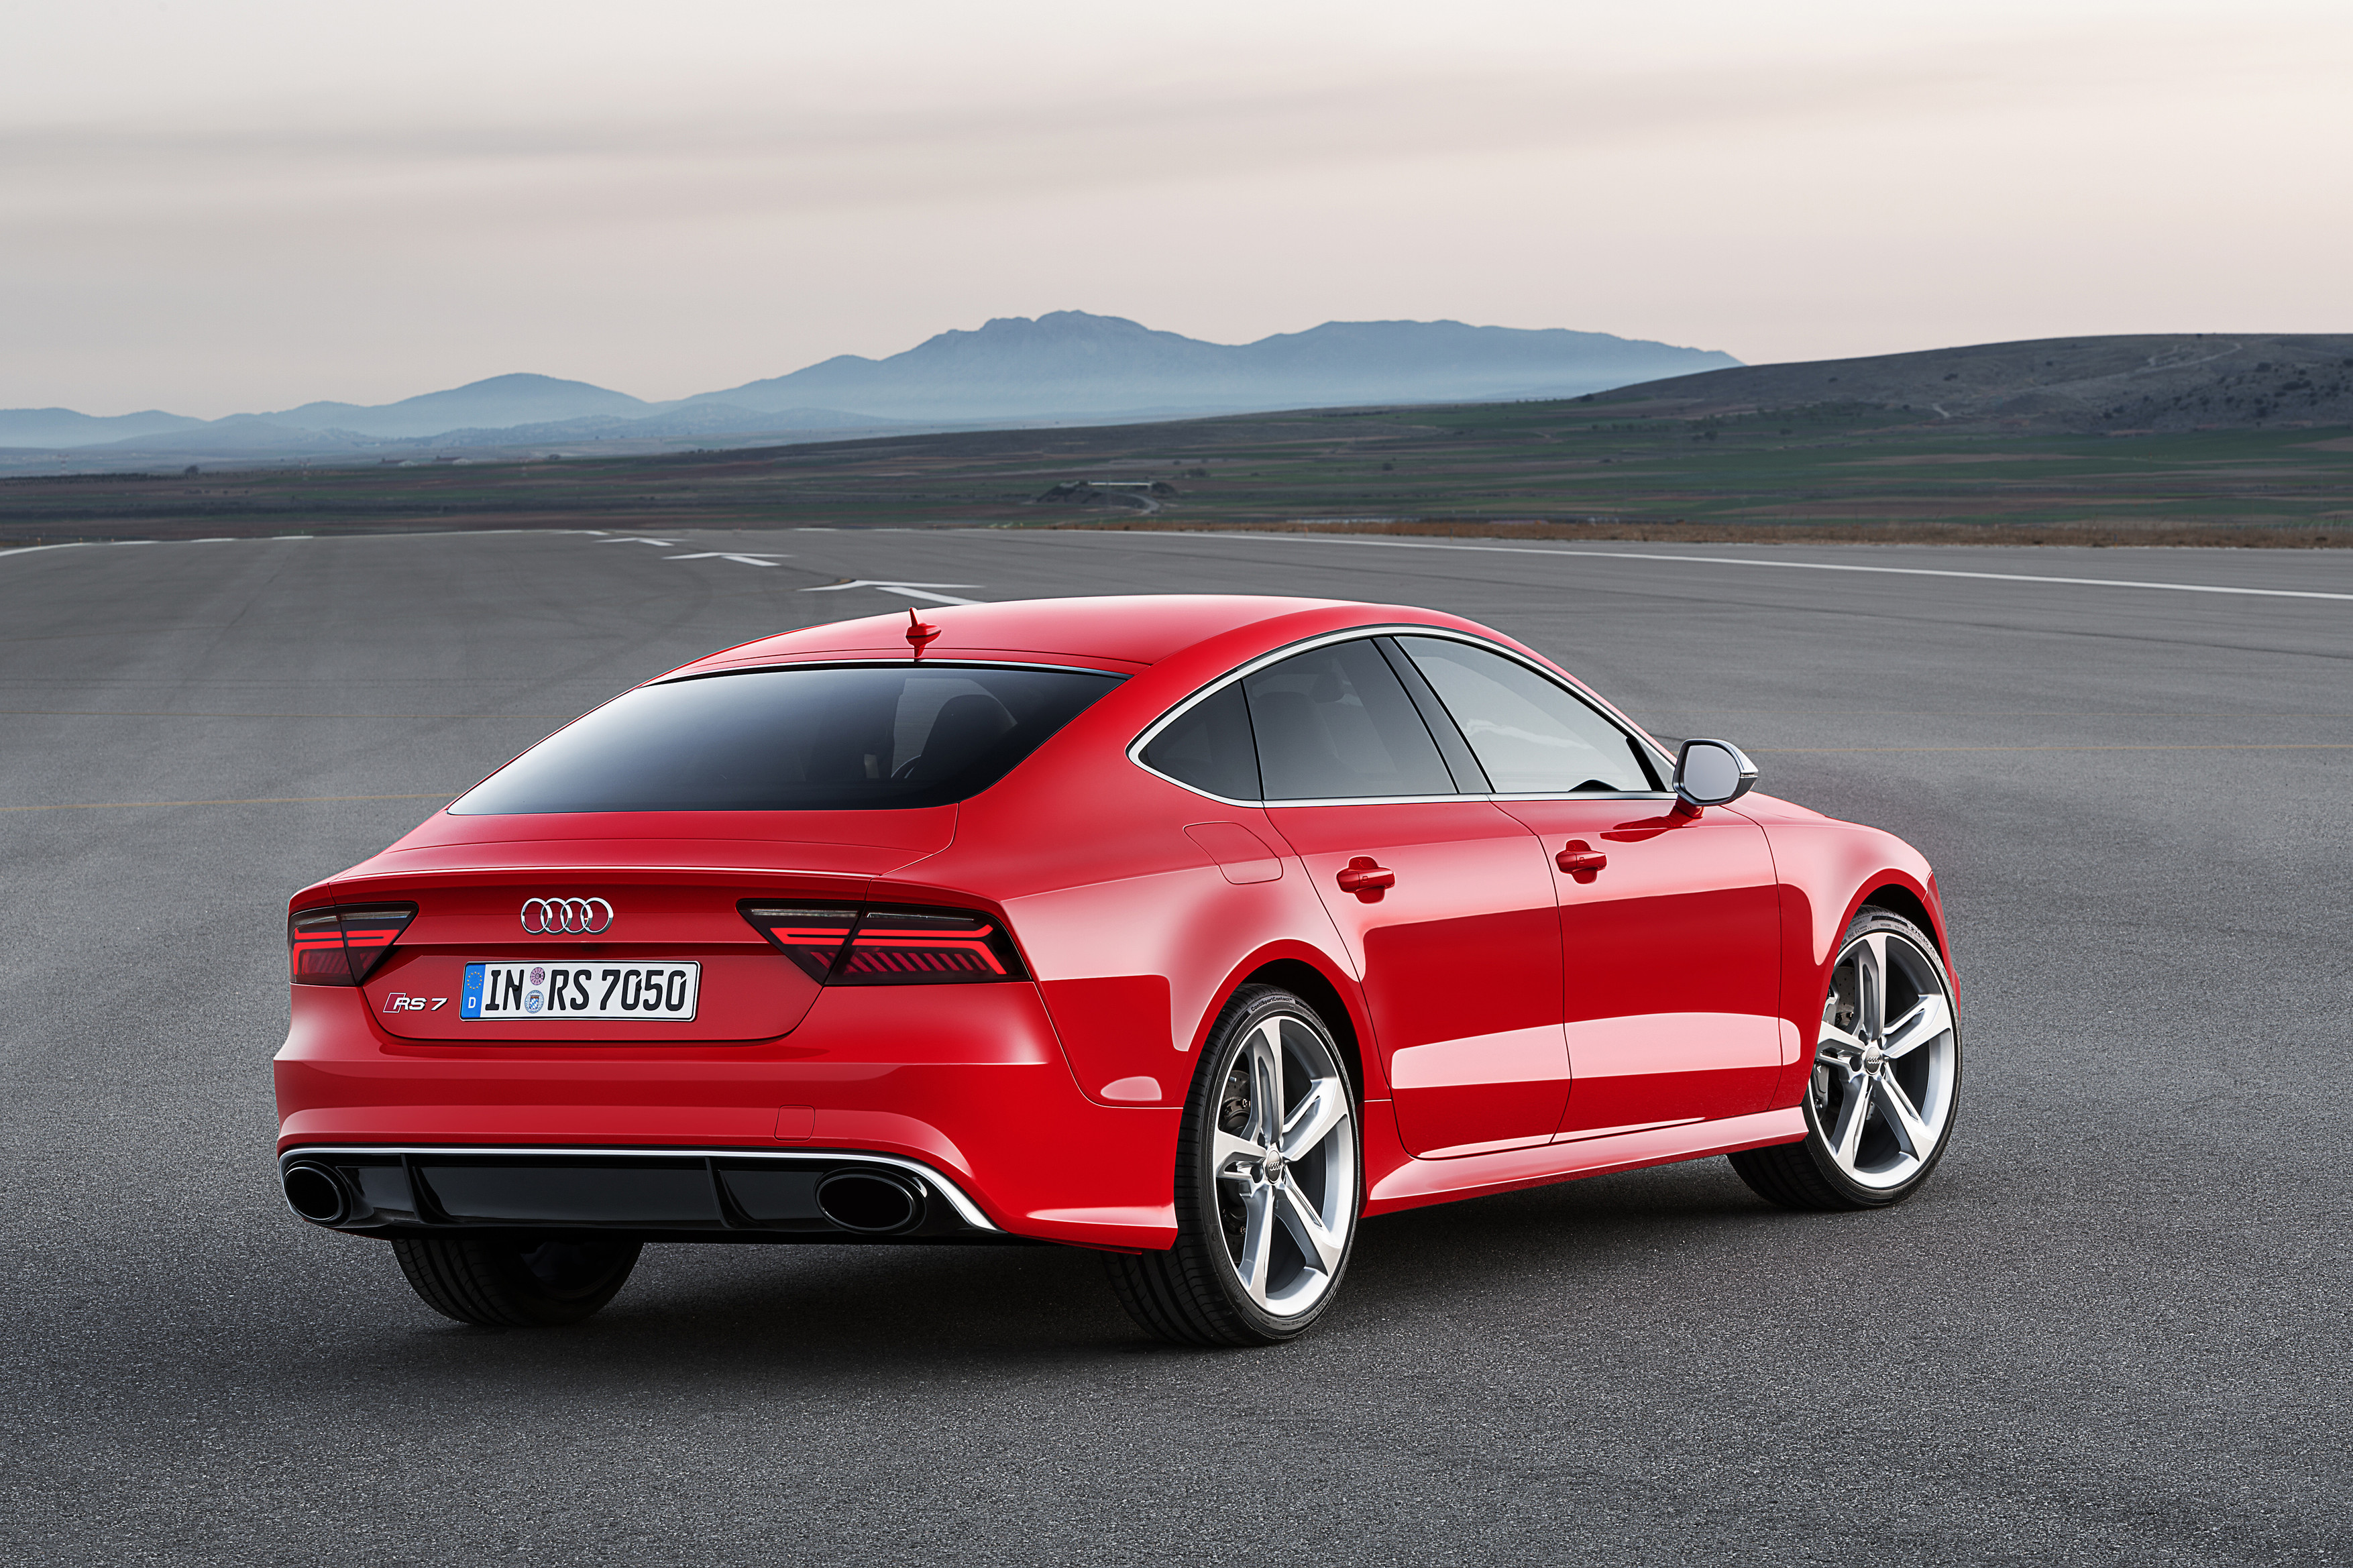 An Audi RS7 Sportback in Misano Red parked in the middle of a road with a mountain backdrop